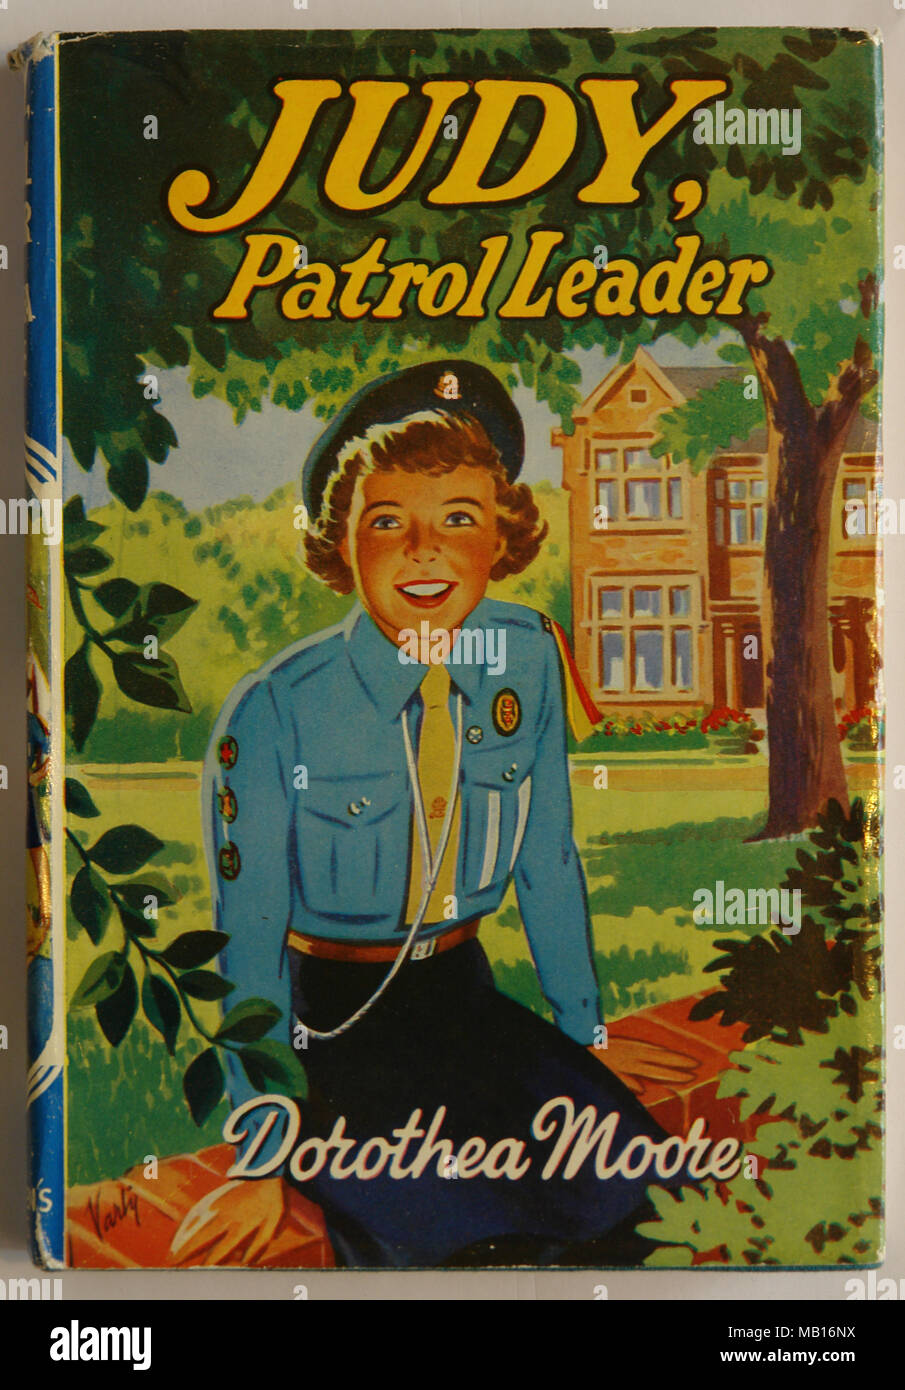 Judy Patrol Leader dates from 1966 although the story was first published back in 1934, written by Dorothea Moore who was a Guide leader between the wars. The cover artist, Frank Varty, has updated the uniform. Frank's work adorned hundreds of children's books in the 1950s and 60s. Dorothea herself died in 1934 and The Children's Press was a range from Collins Publishers, making the most out of their back-catalogue. Stock Photo